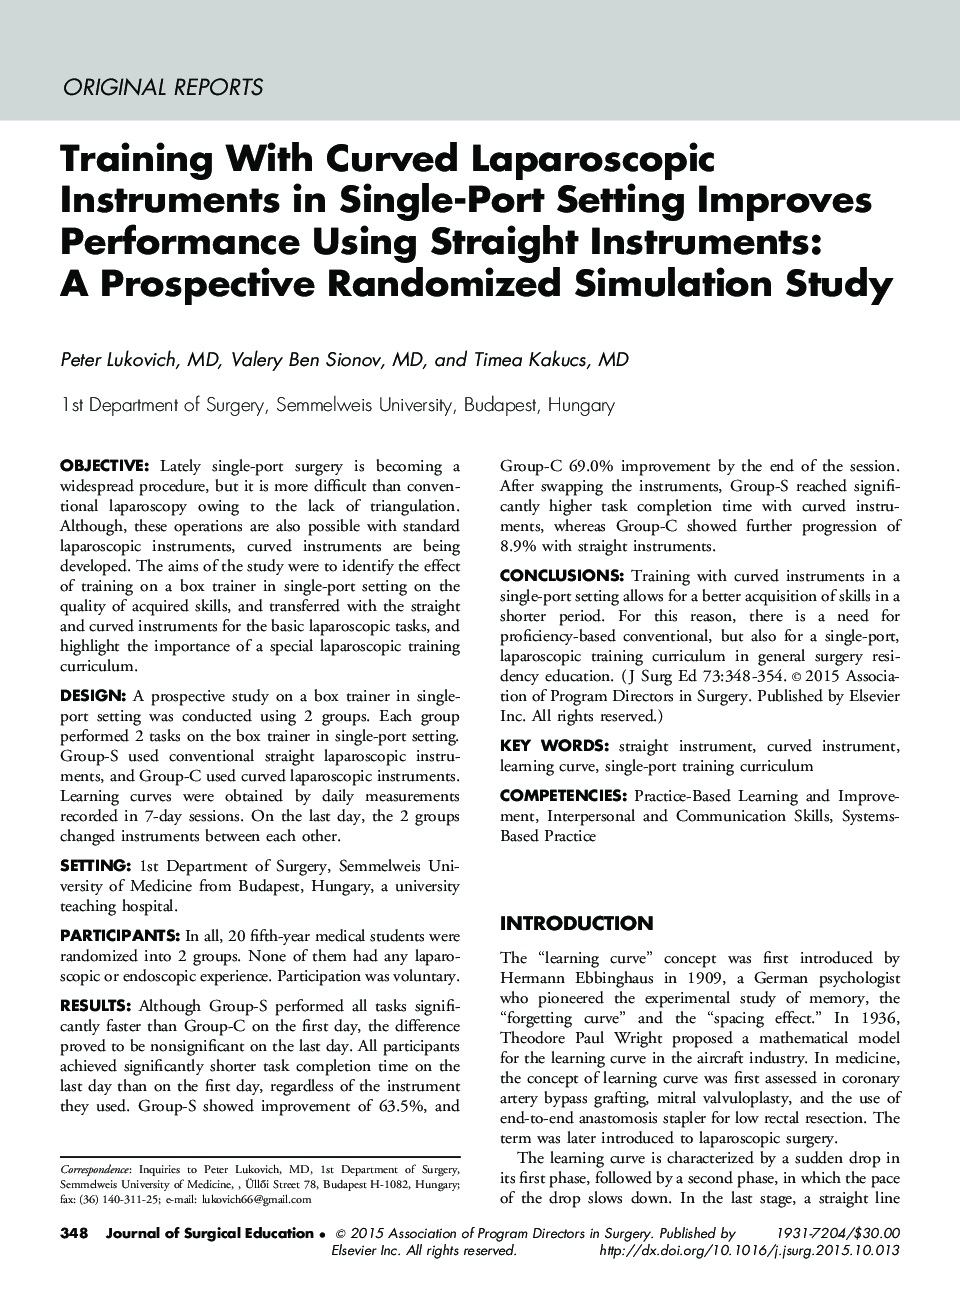 Training With Curved Laparoscopic Instruments in Single-Port Setting Improves Performance Using Straight Instruments: A Prospective Randomized Simulation Study